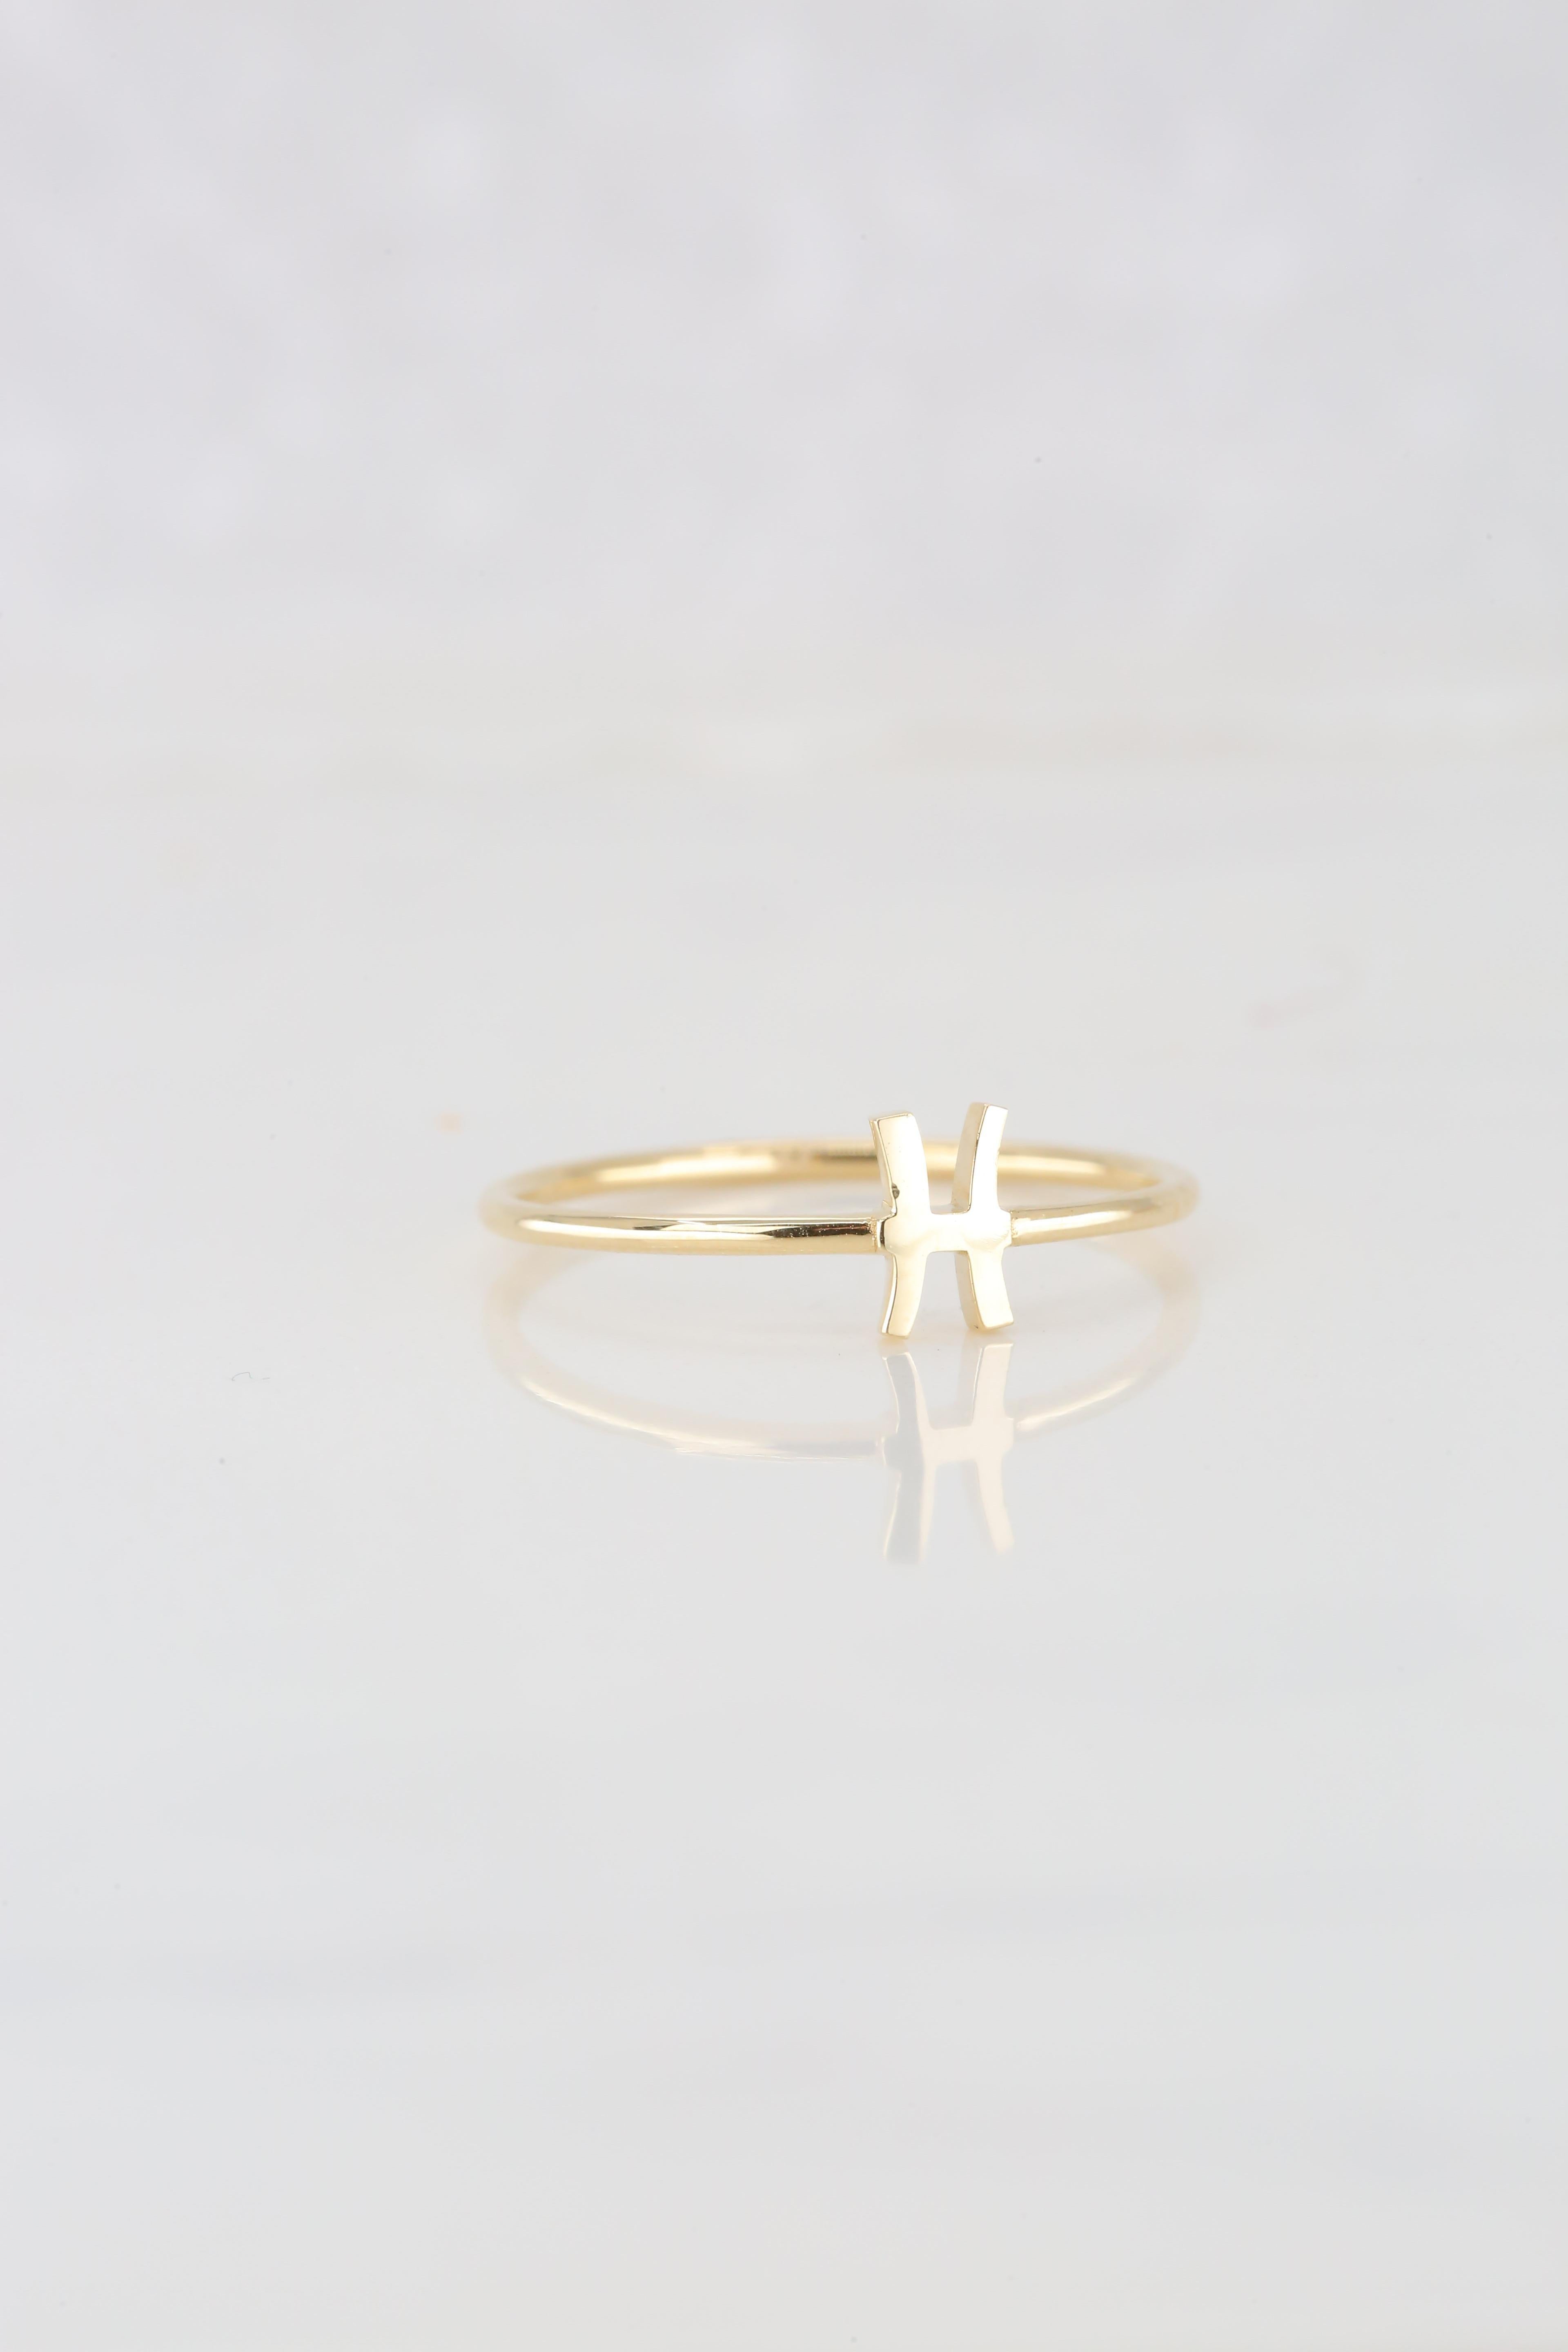 For Sale:  14K Gold Pisces Ring, Pisces Sign Gold Ring 10